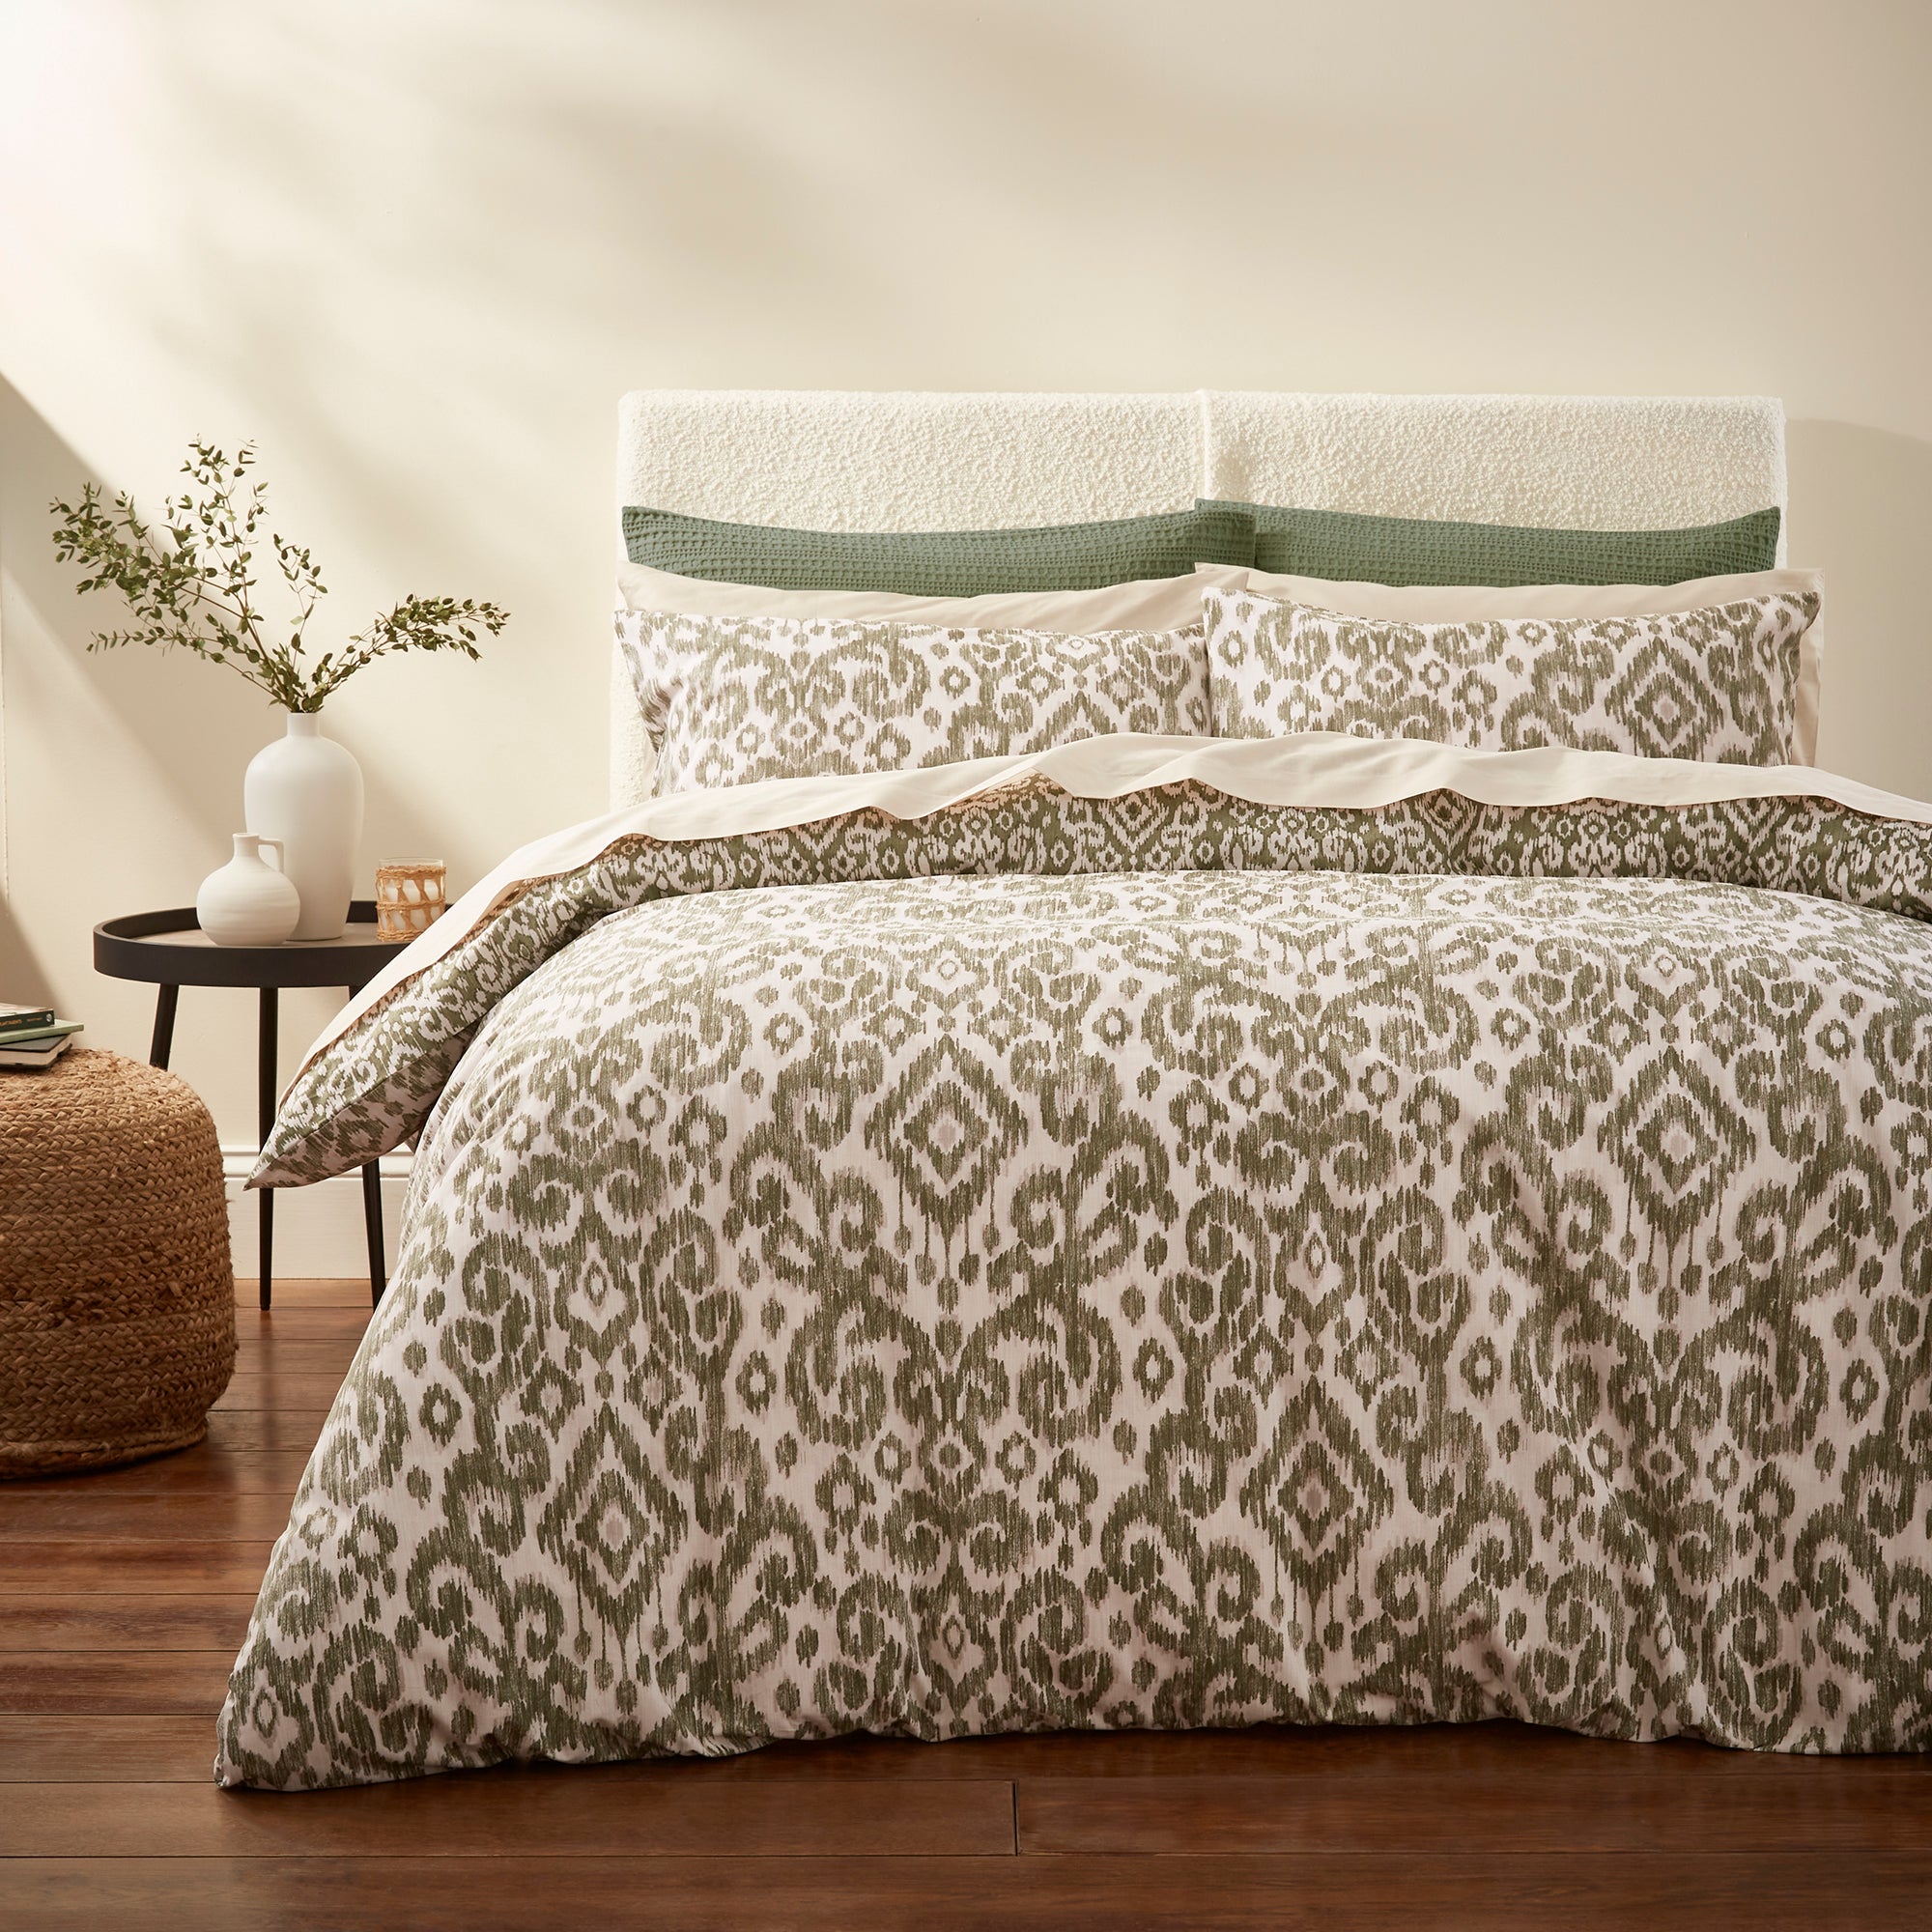 Hao Aztec Olive Duvet Cover And Pillowcase Set Olive Green